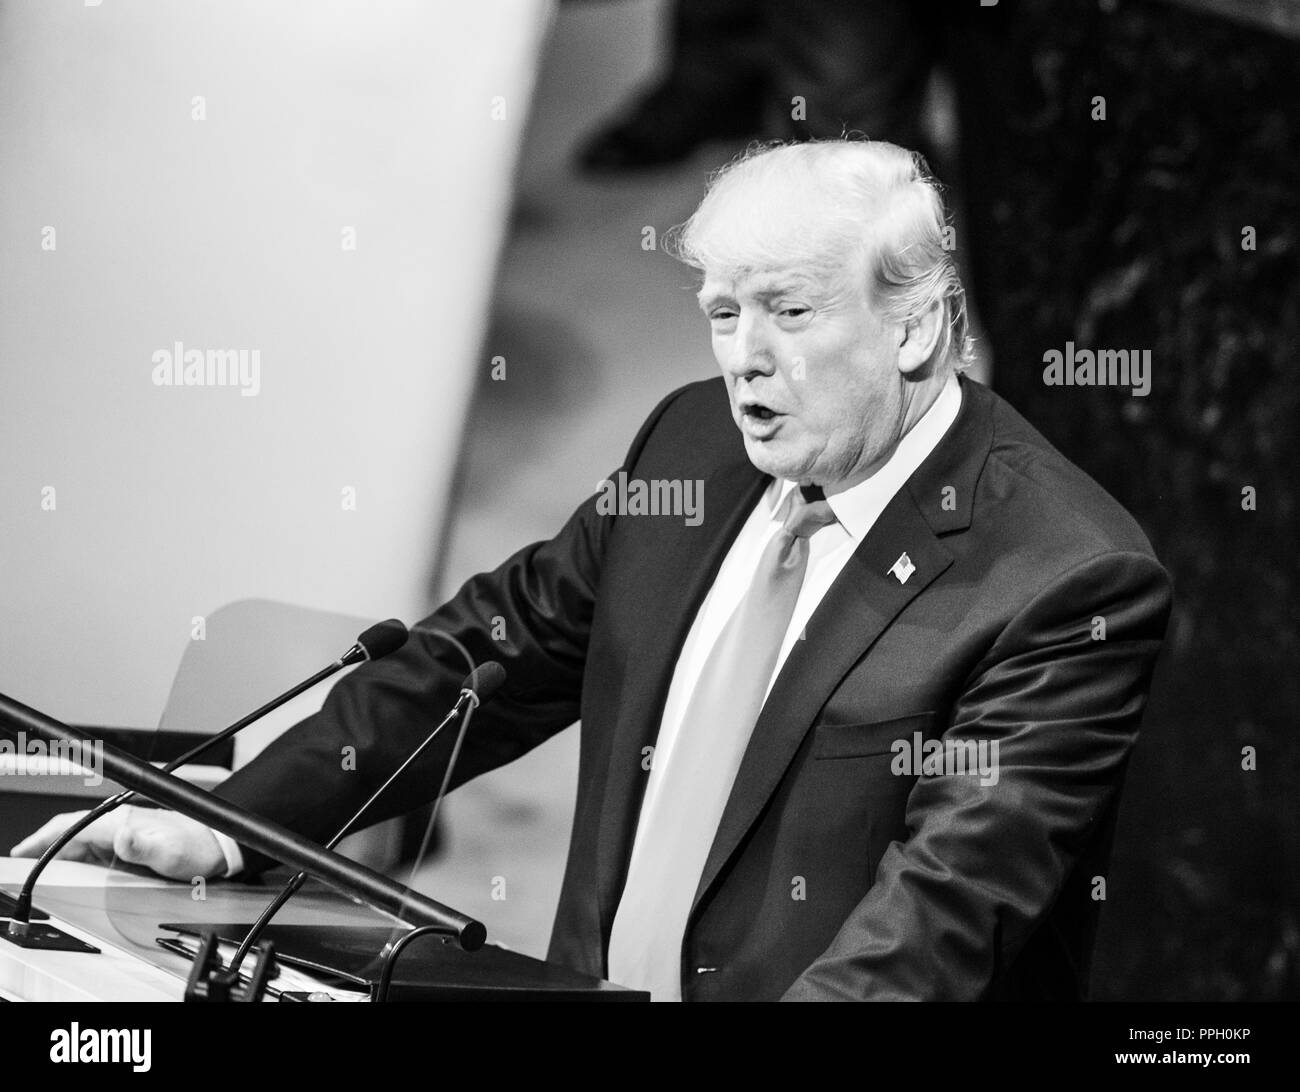 New York, NY - September 25, 2018: President of USA Donald Trump speaks at 73rd UNGA session at United Nations Headquarters Credit: lev radin/Alamy Live News Stock Photo